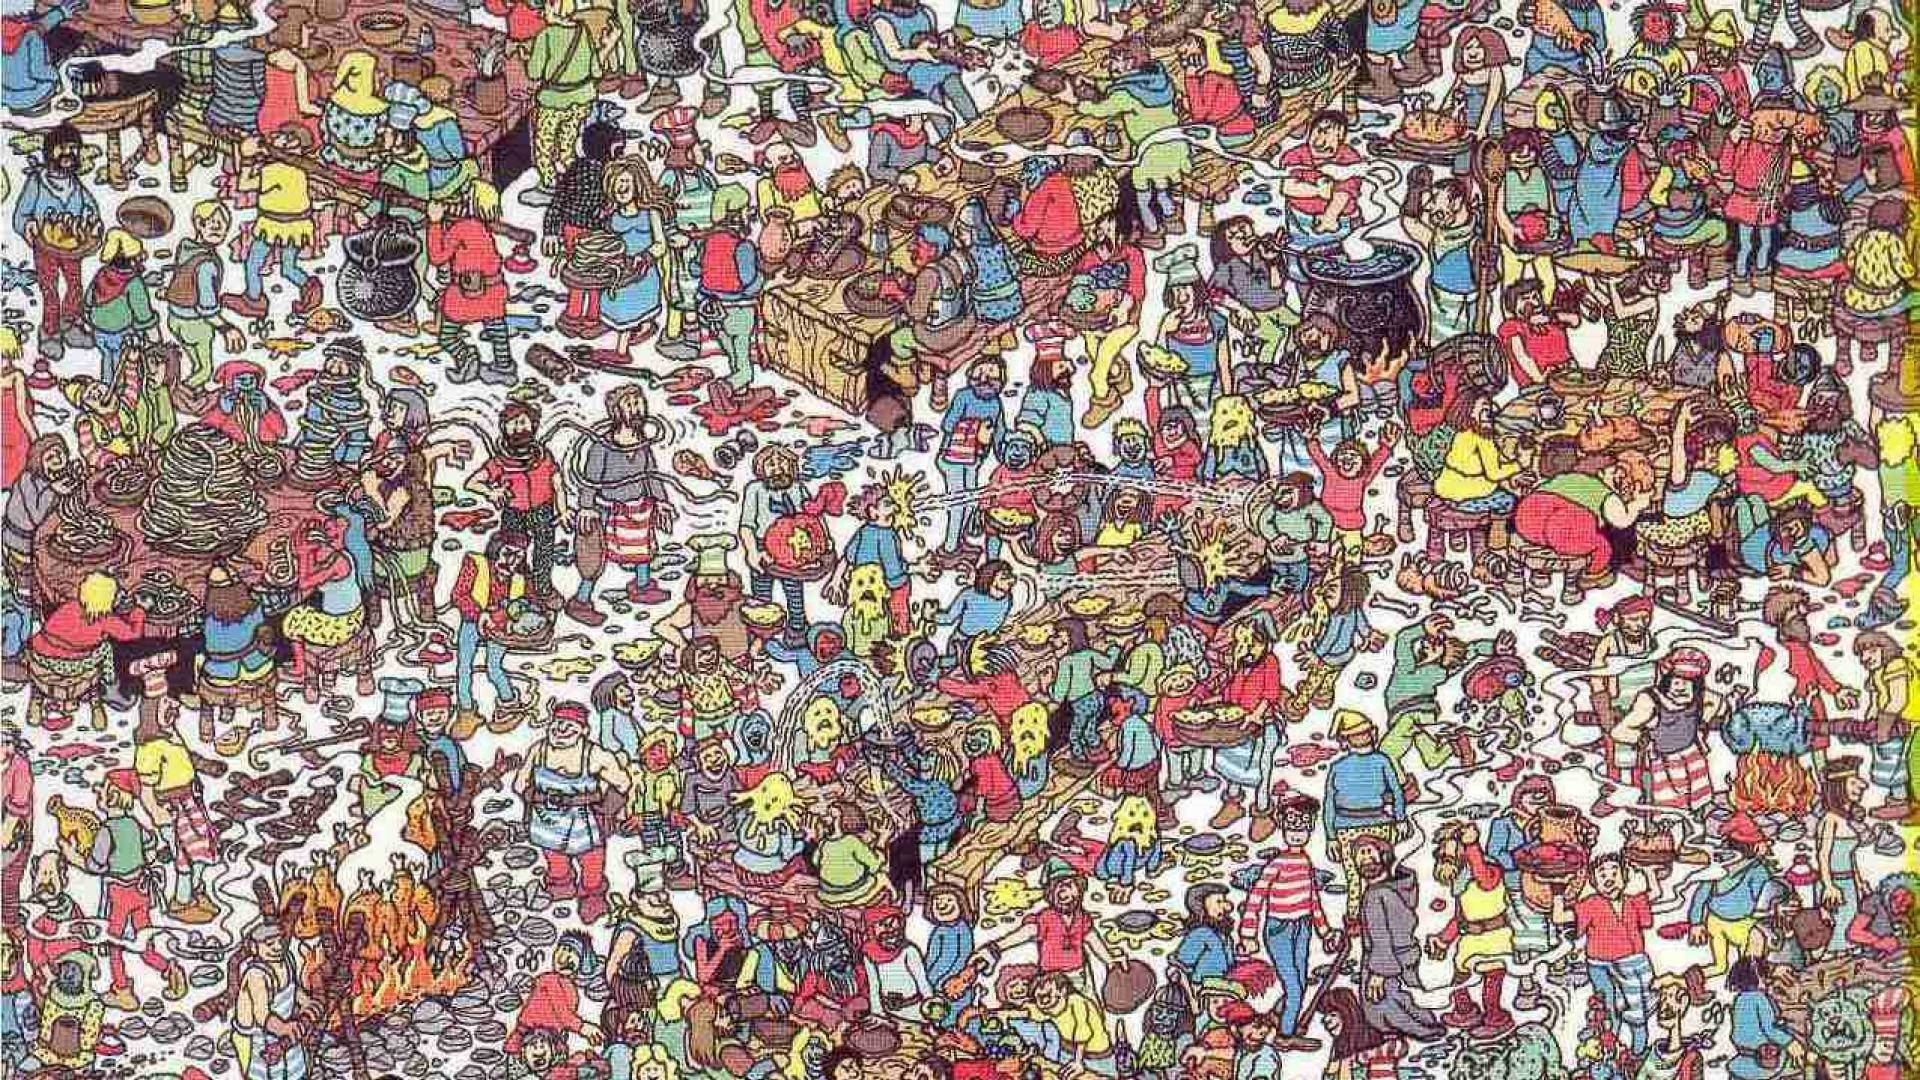 Spotting Waldo In The Midst Of A Grand Feast Background